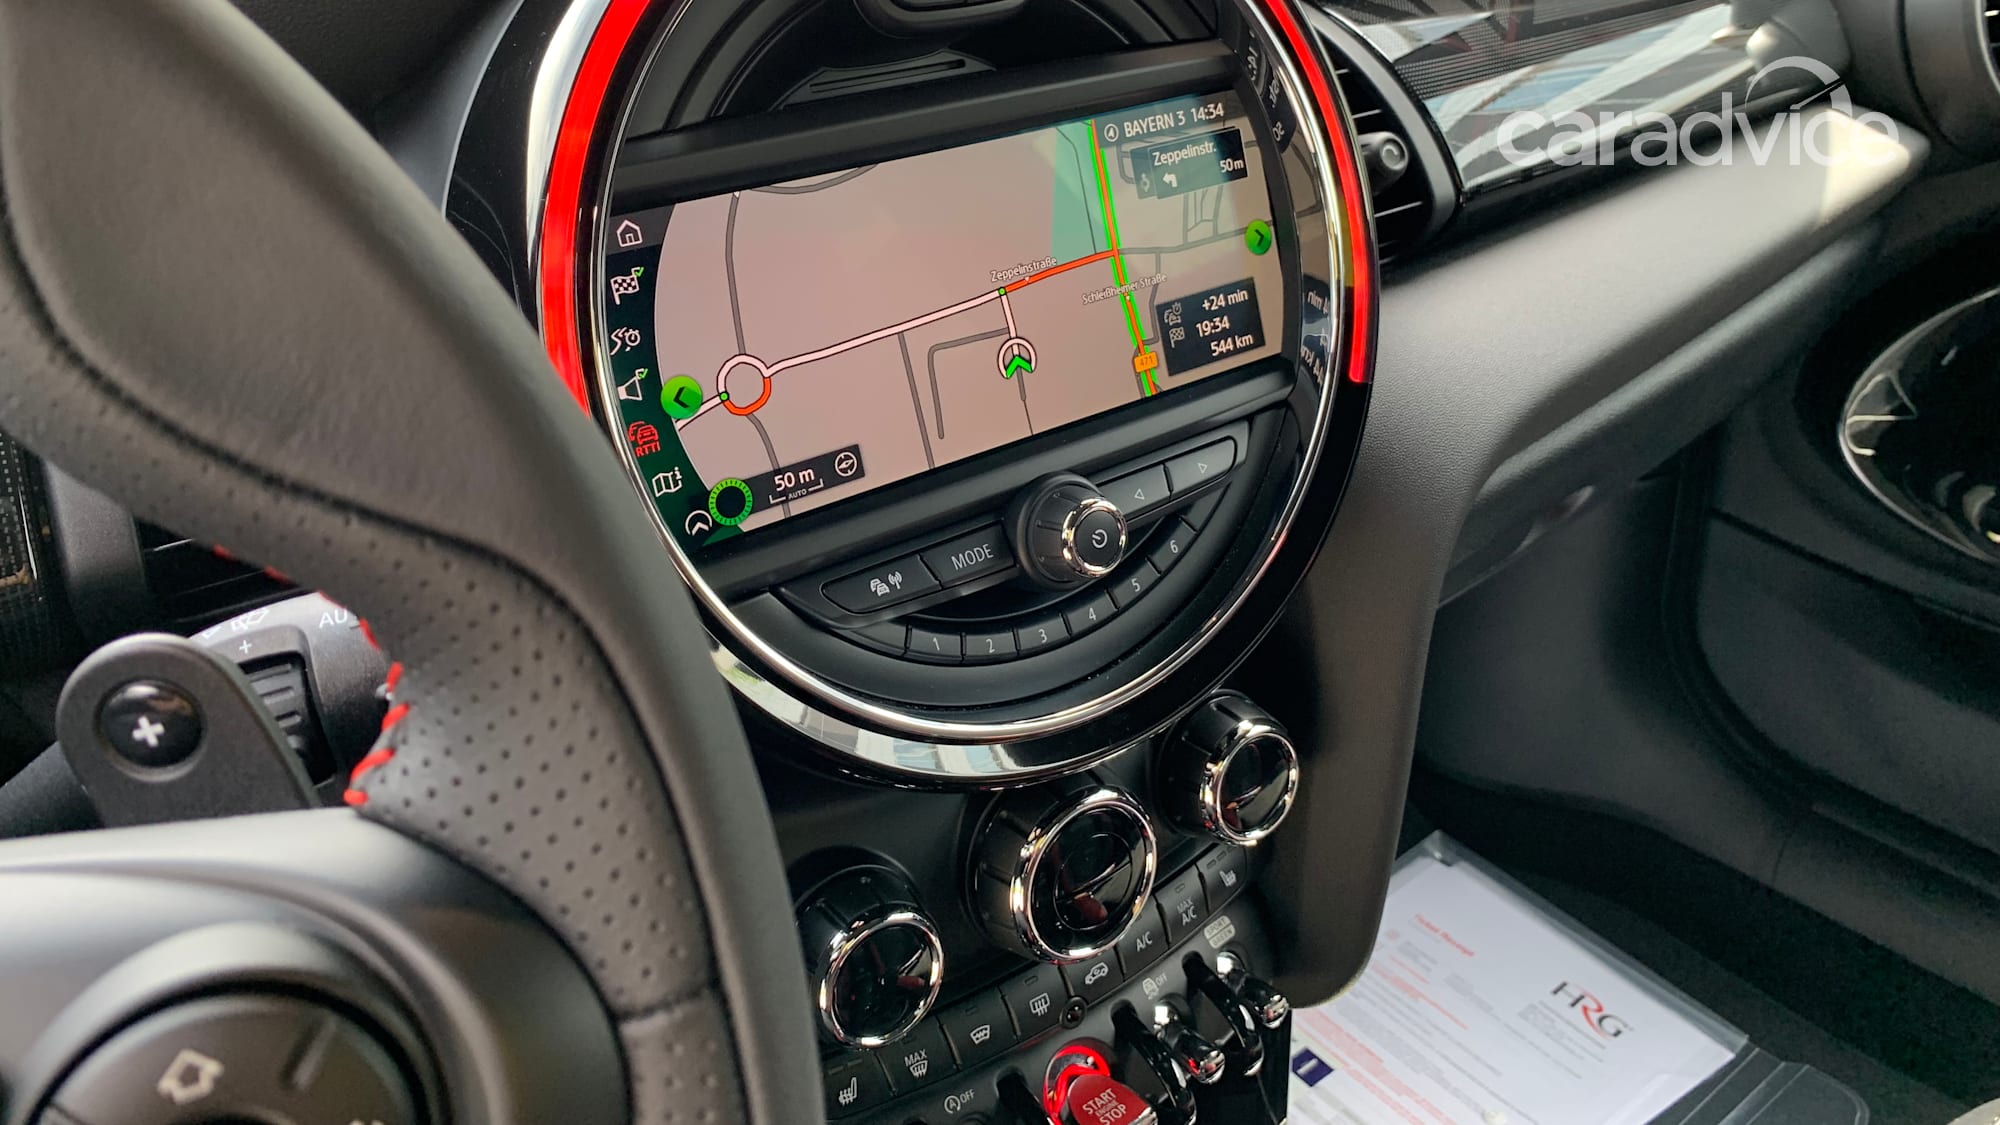 2019 Mini John Cooper Works hatch review: Munich to the Nürburgring ...